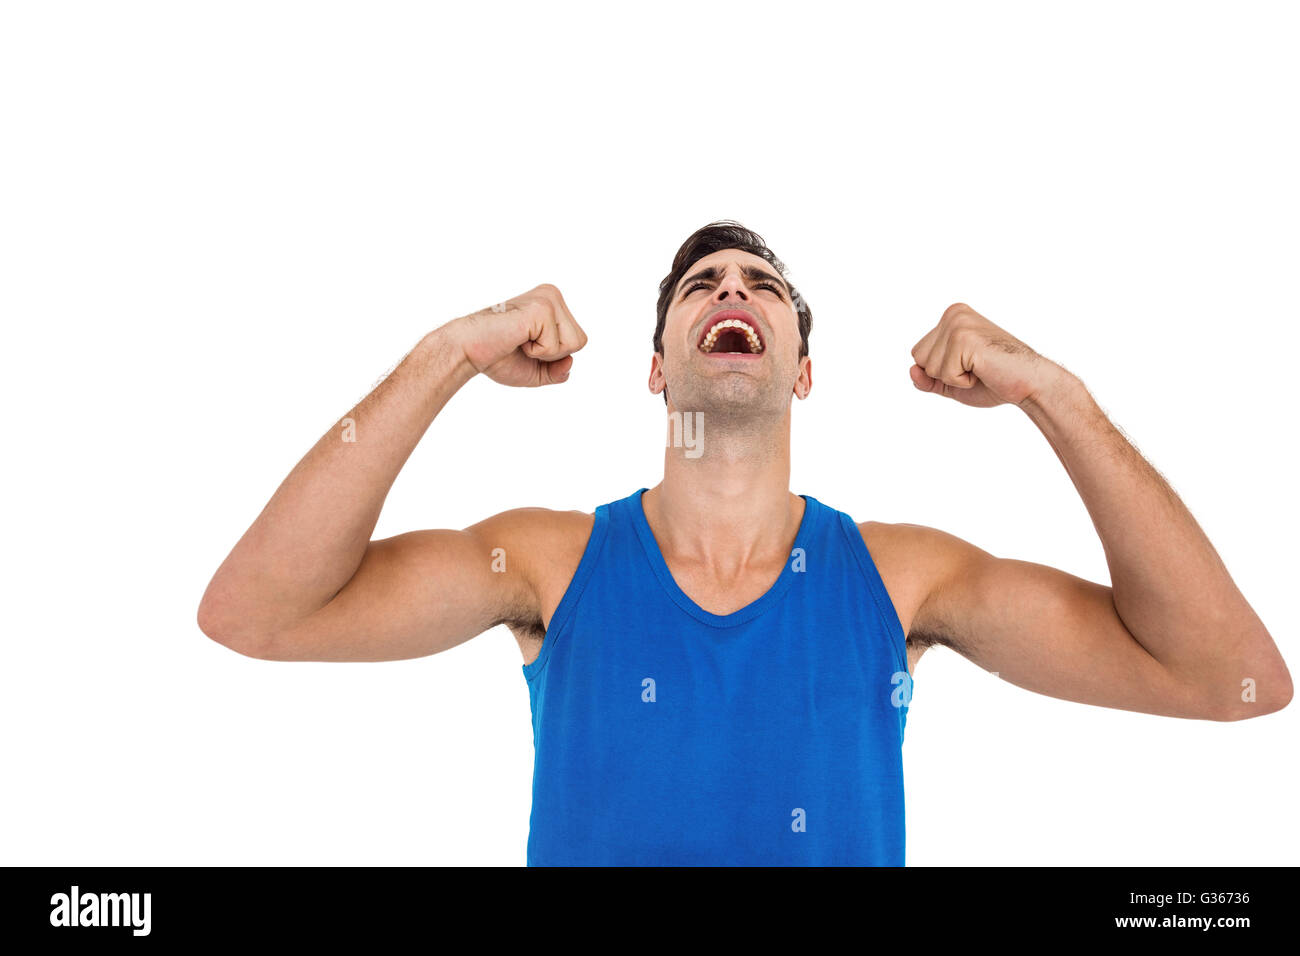 Excited male athlete posing after victory Stock Photo